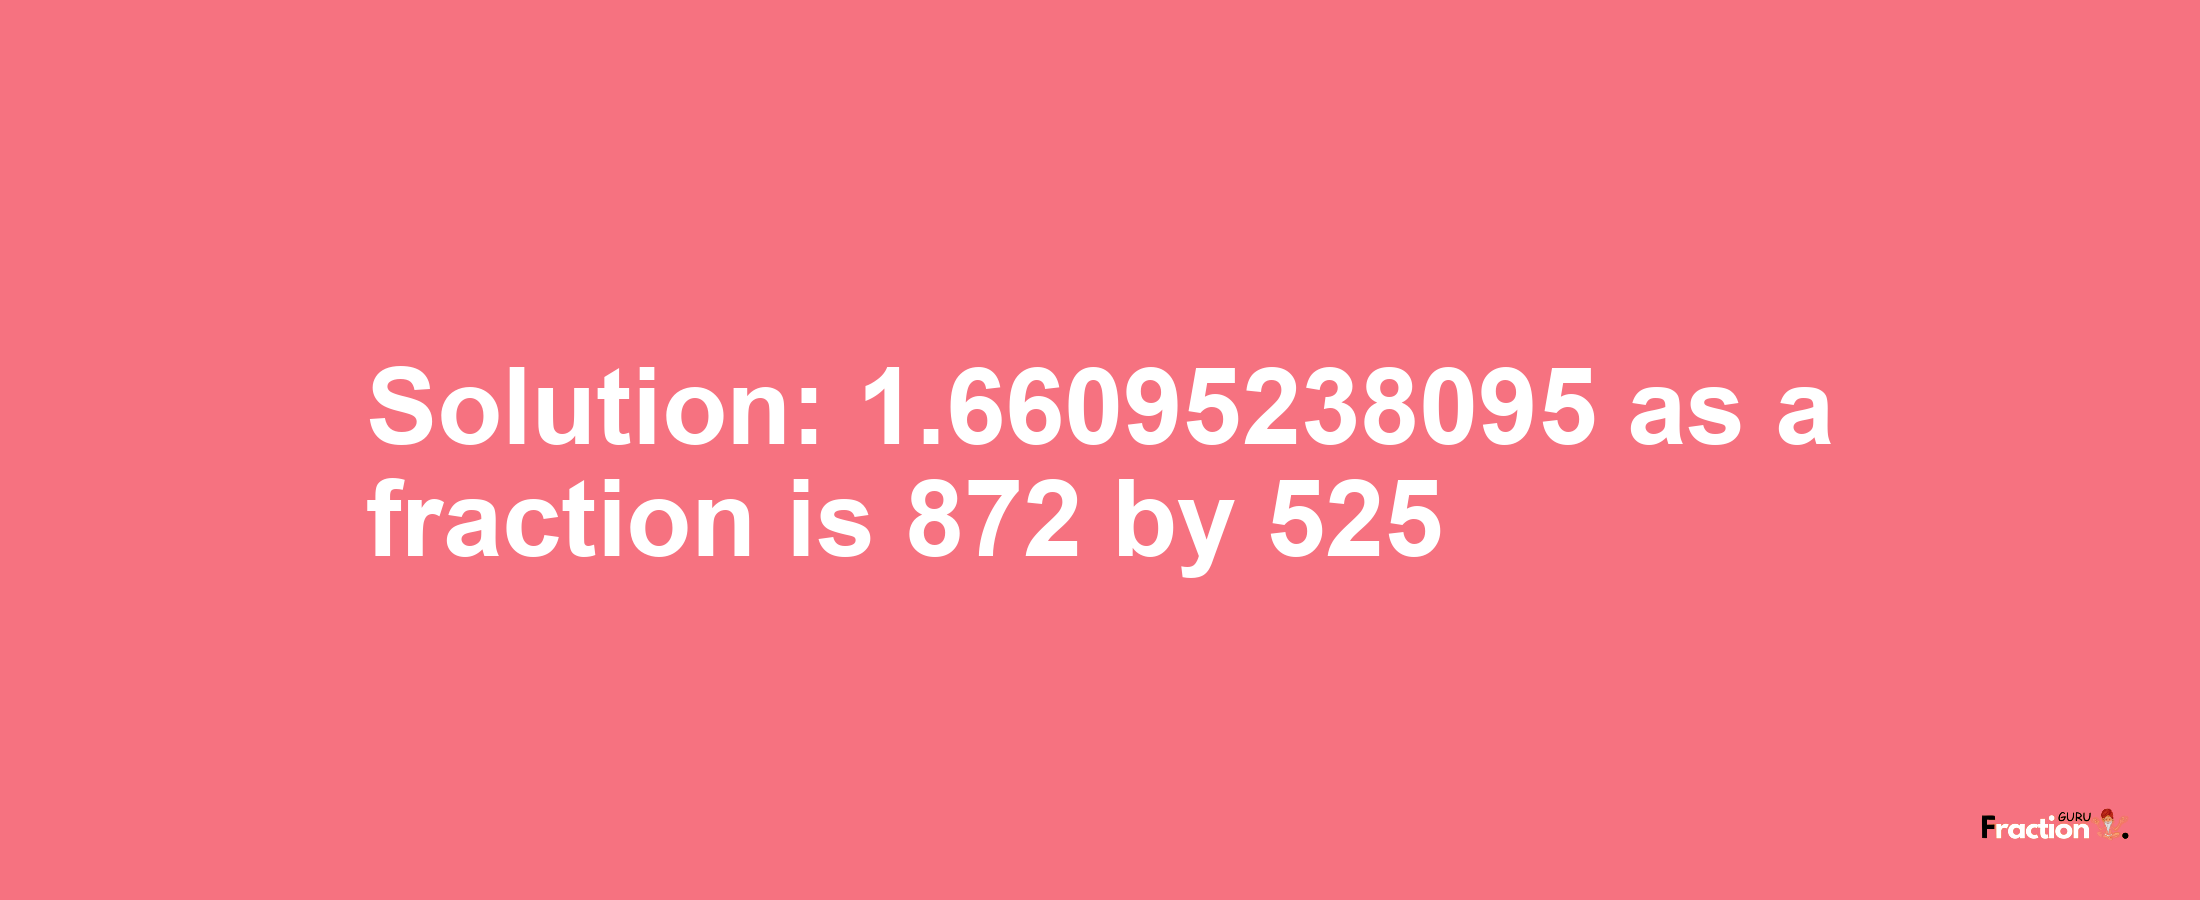 Solution:1.66095238095 as a fraction is 872/525